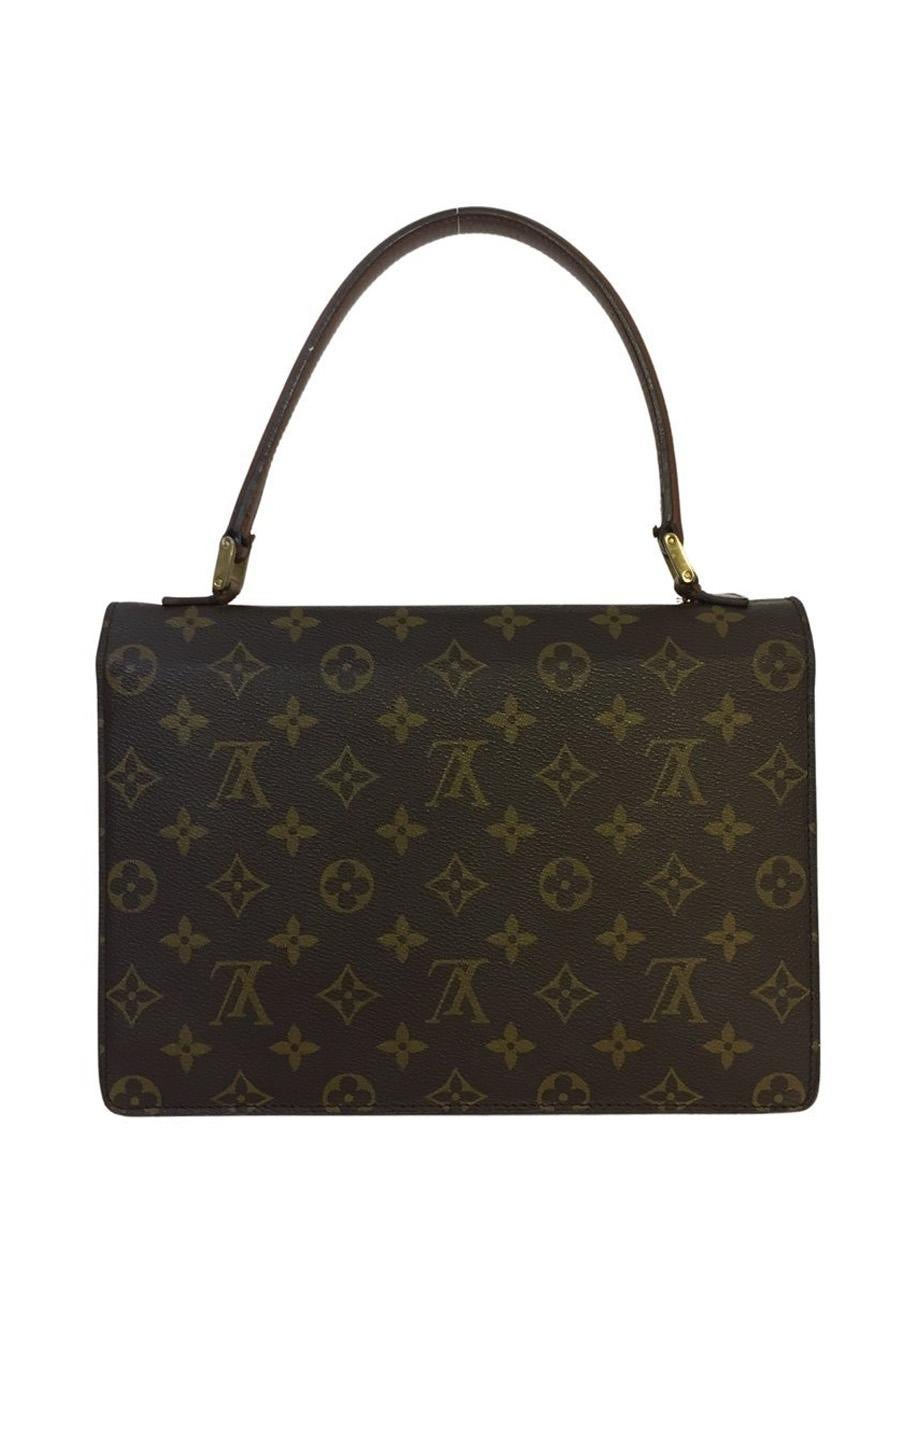 Louis Vuitton Concorde Monogram Canvas is just as stunning as the Parisian square it is named after, which sits between the Champs-Élysées and Jardin des Tuileries.The bag has Vachetta leather trims and the hardware is gold-plated. Open its envelope